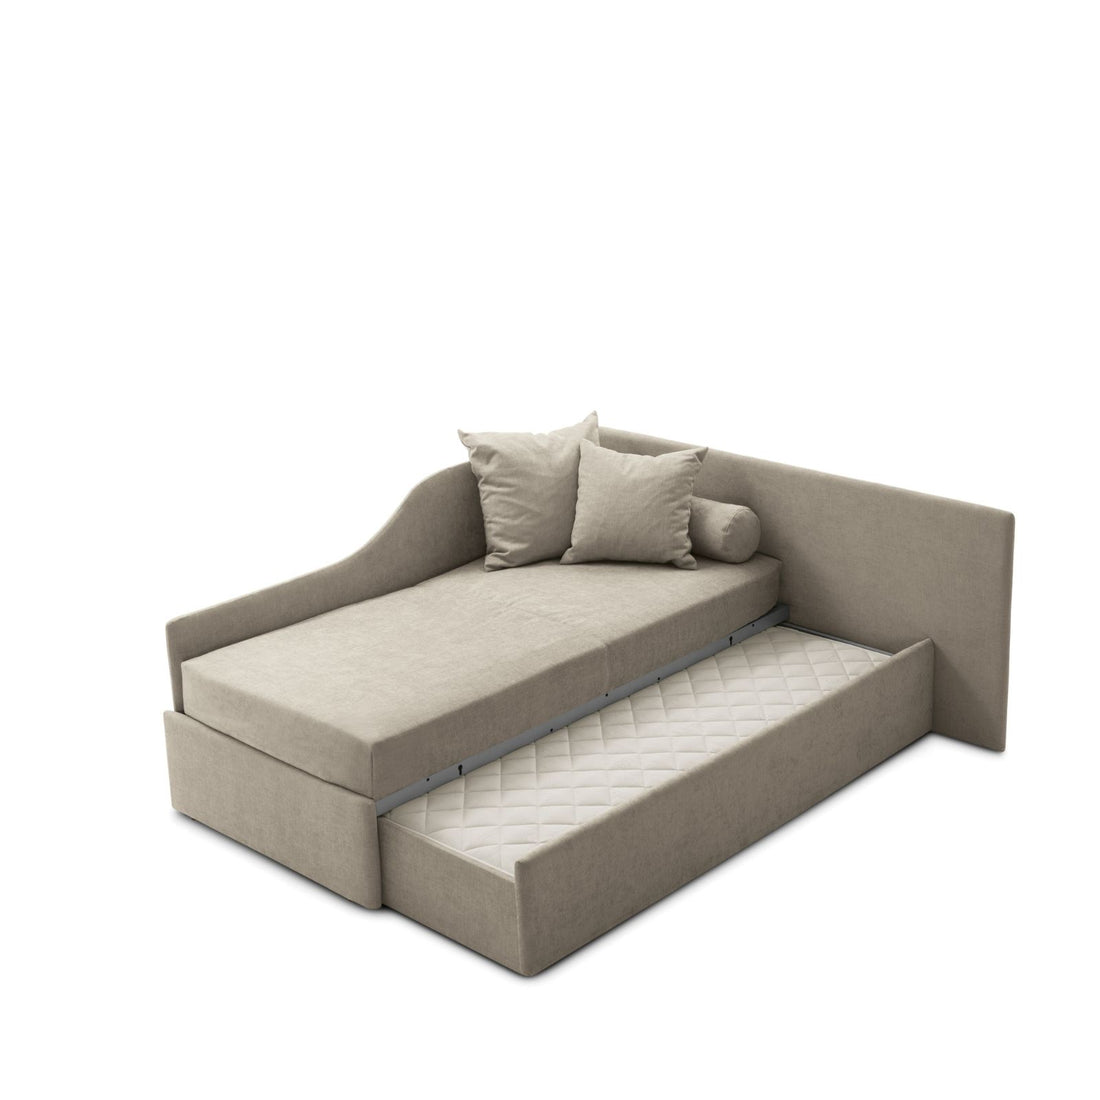 Line 8 Duo |  Sofa Bed